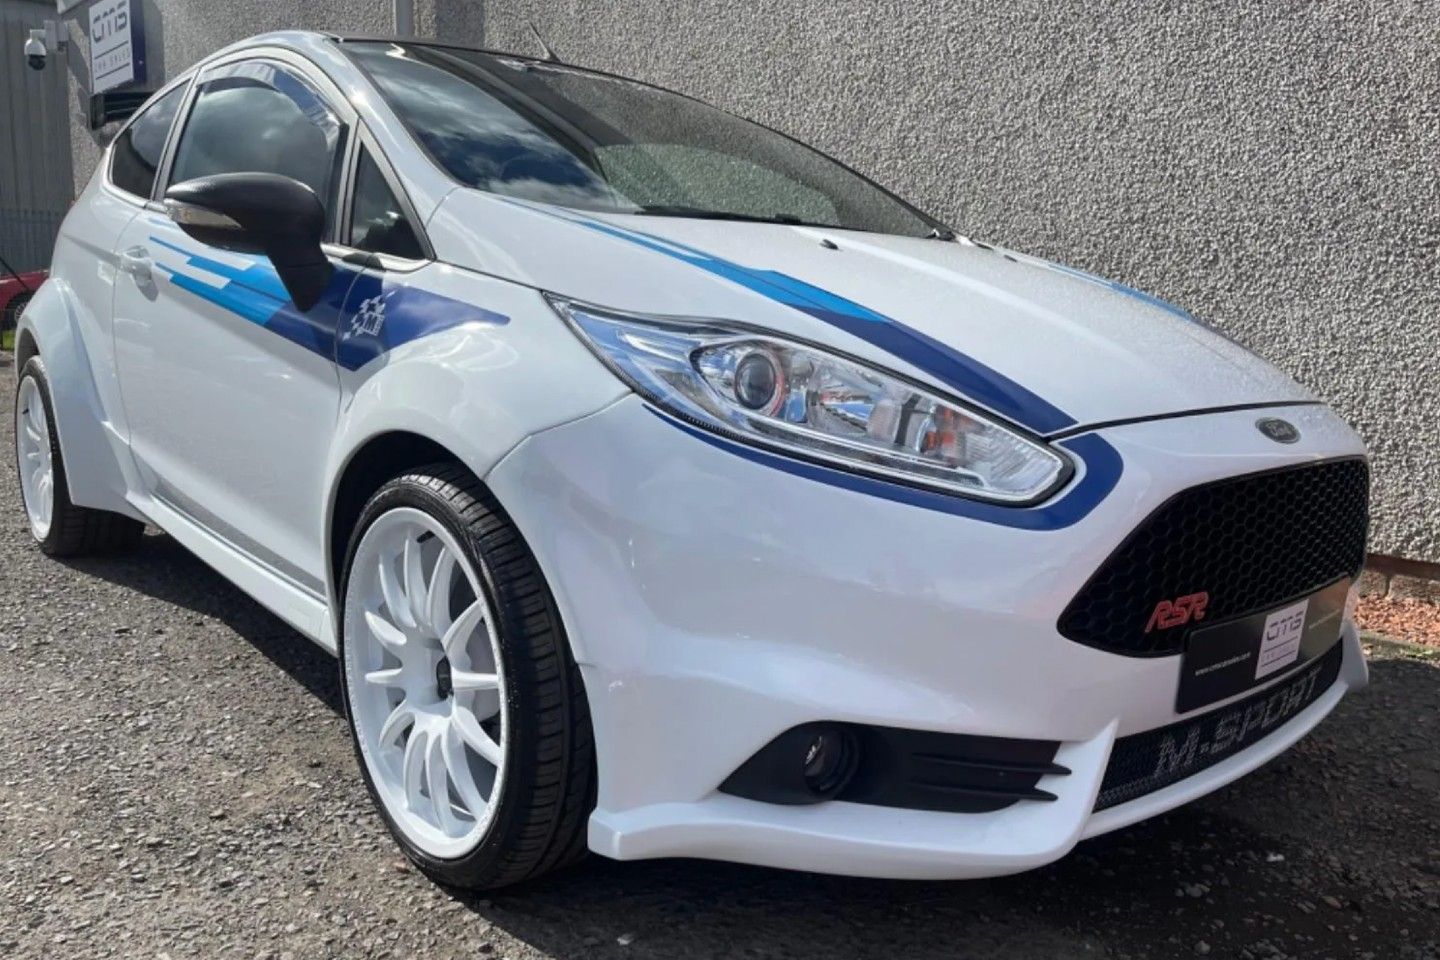 RE Rallyinspired Ford Fiesta ST MSport for sale Page 1 General